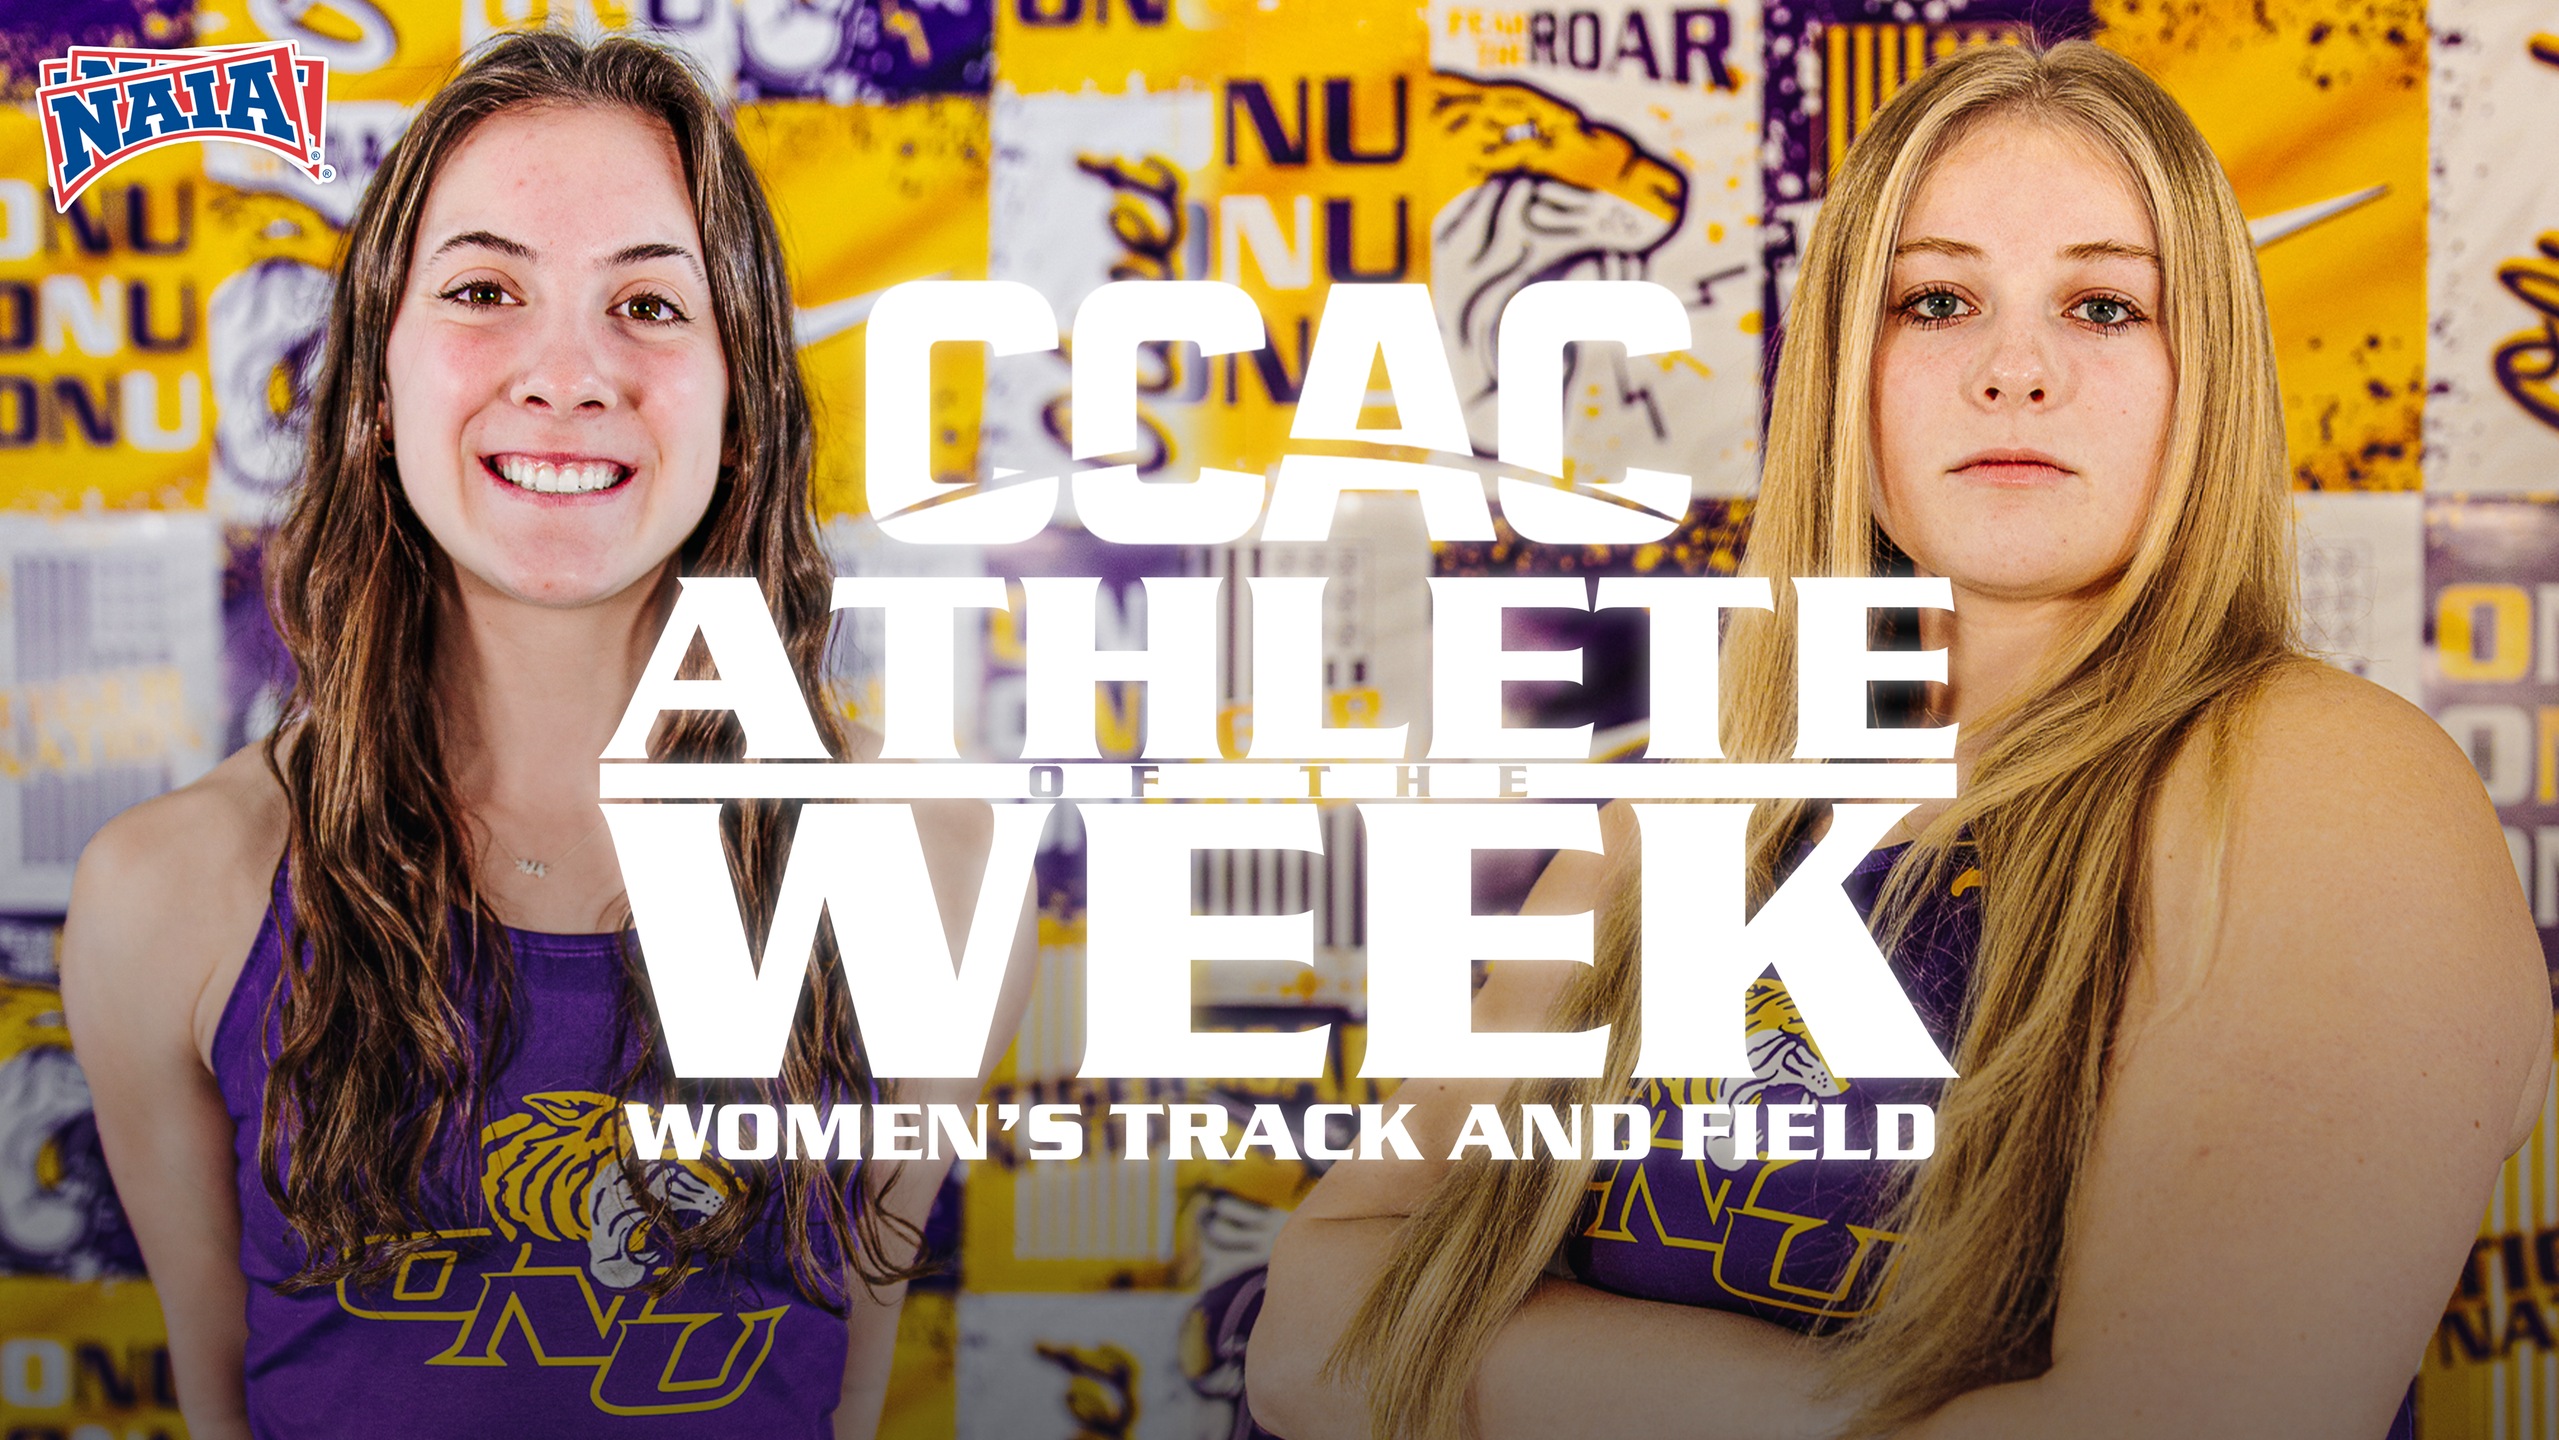 ONU REPEATS SWEEP OF CCAC TRACK & FIELD WEEKLY HONORS, ANTKOVIAK RECOGNIZED NATIONALLY AGAIN